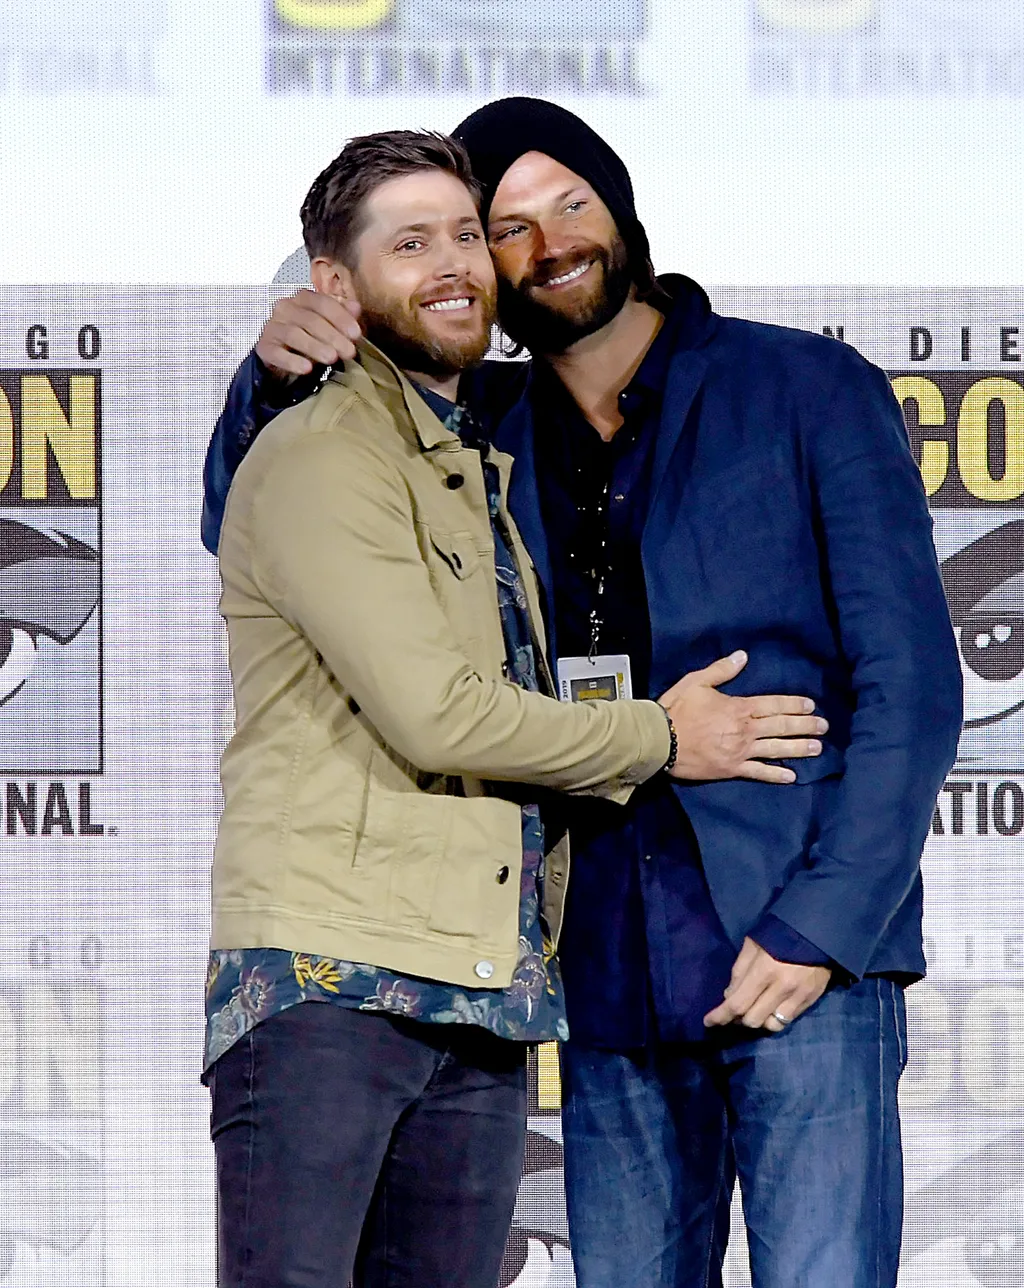 2019 Comic-Con International - "Supernatural" Special Video Presentation And Q&A GettyImageRank1 VIDEO International People VERTICAL THREE QUARTER LENGTH Talking USA California San Diego Presentation - Speech Two People Photography Jared Padalecki Arts Cu